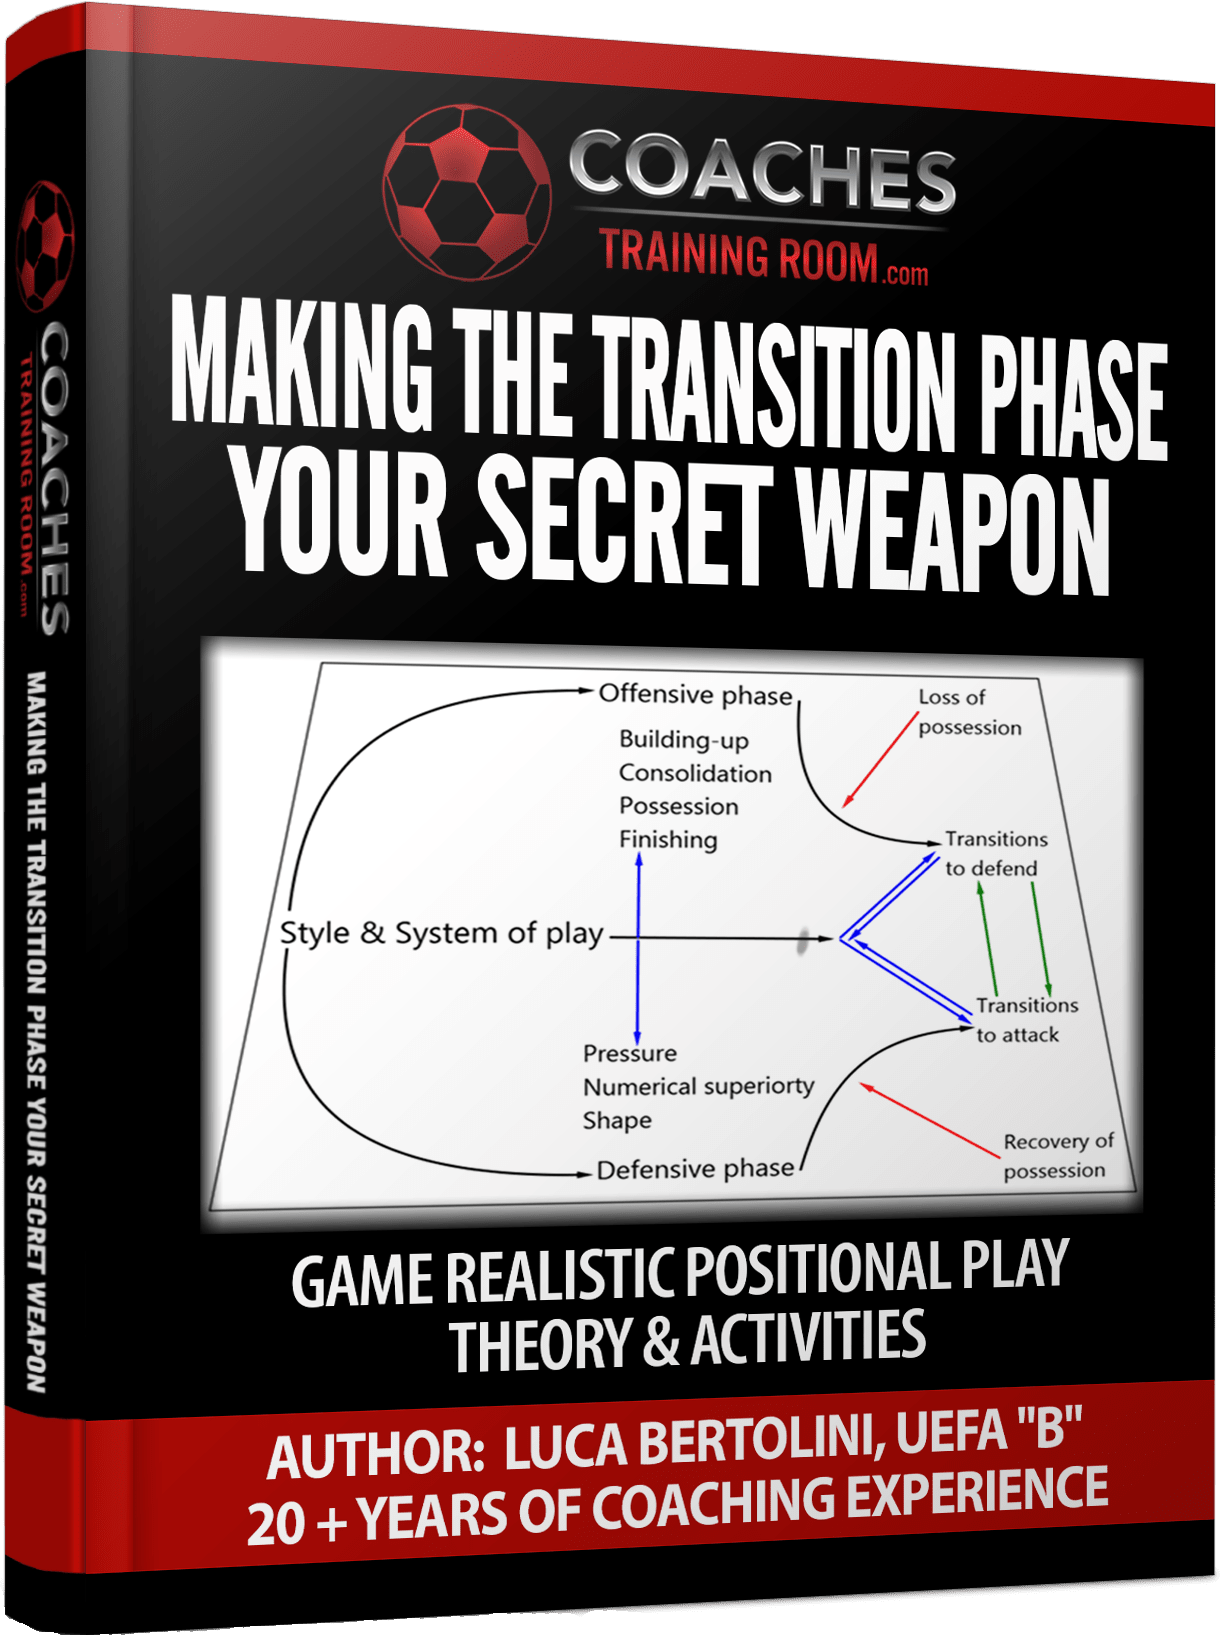 Making the Transition Phase Your Secret Weapon by Coaches Training Room